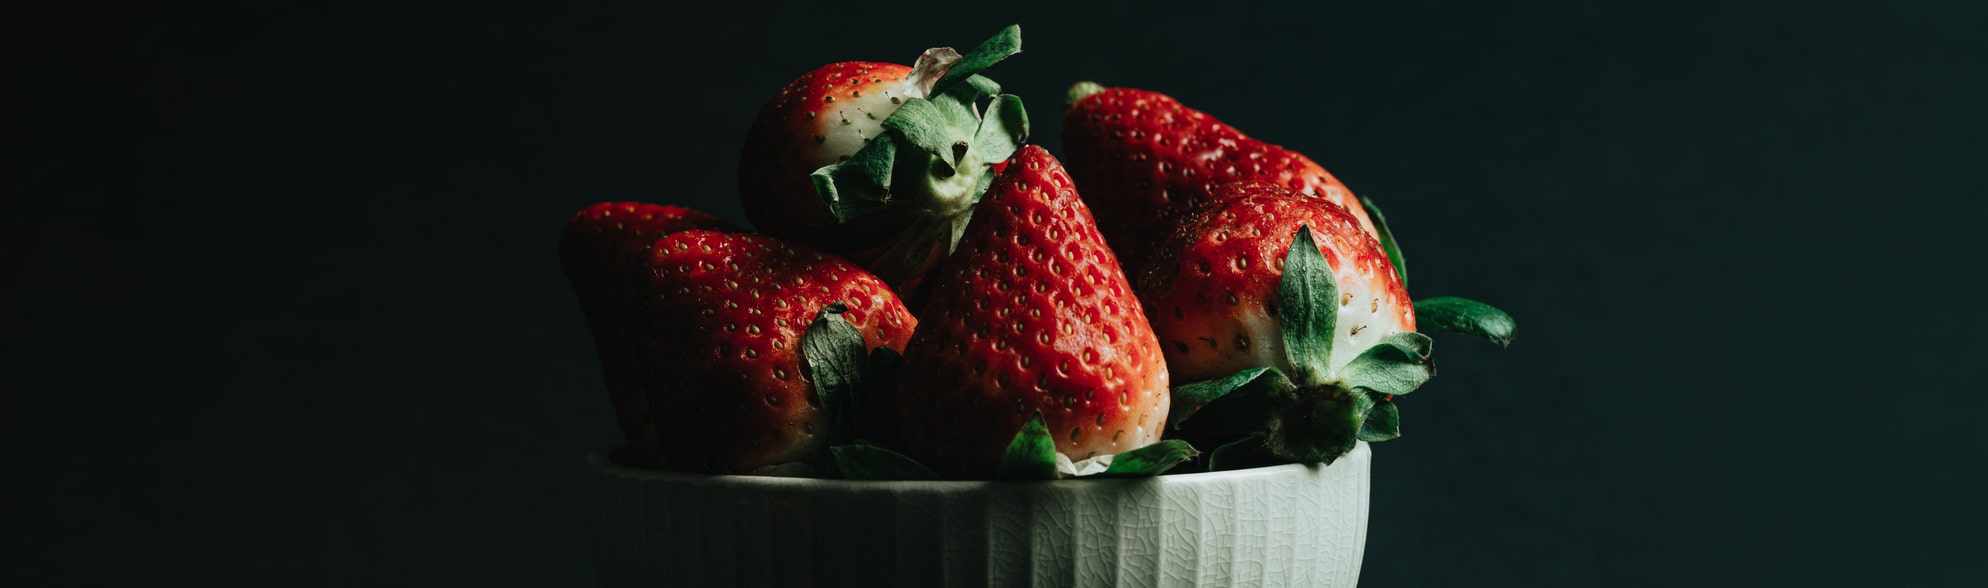 ripe red strawberries in a white bowl